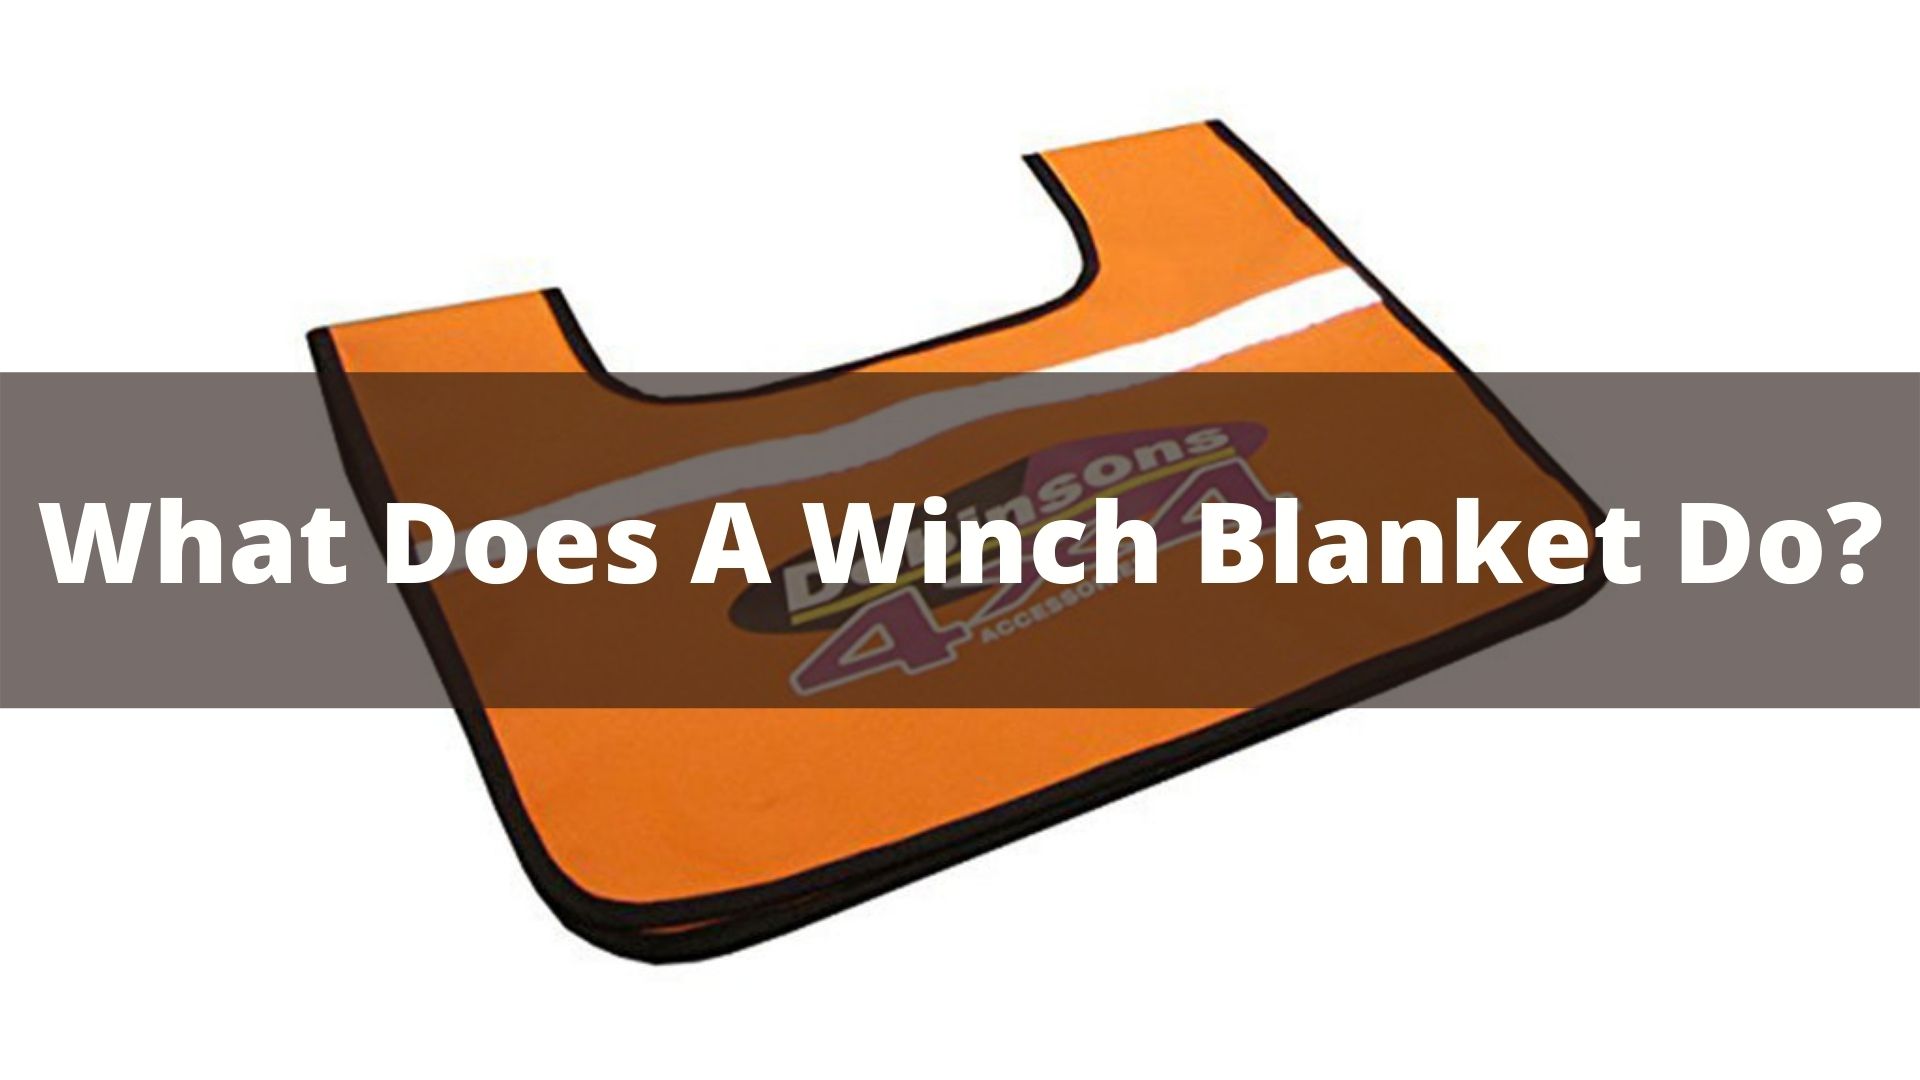 What Does A Winch Blanket Do